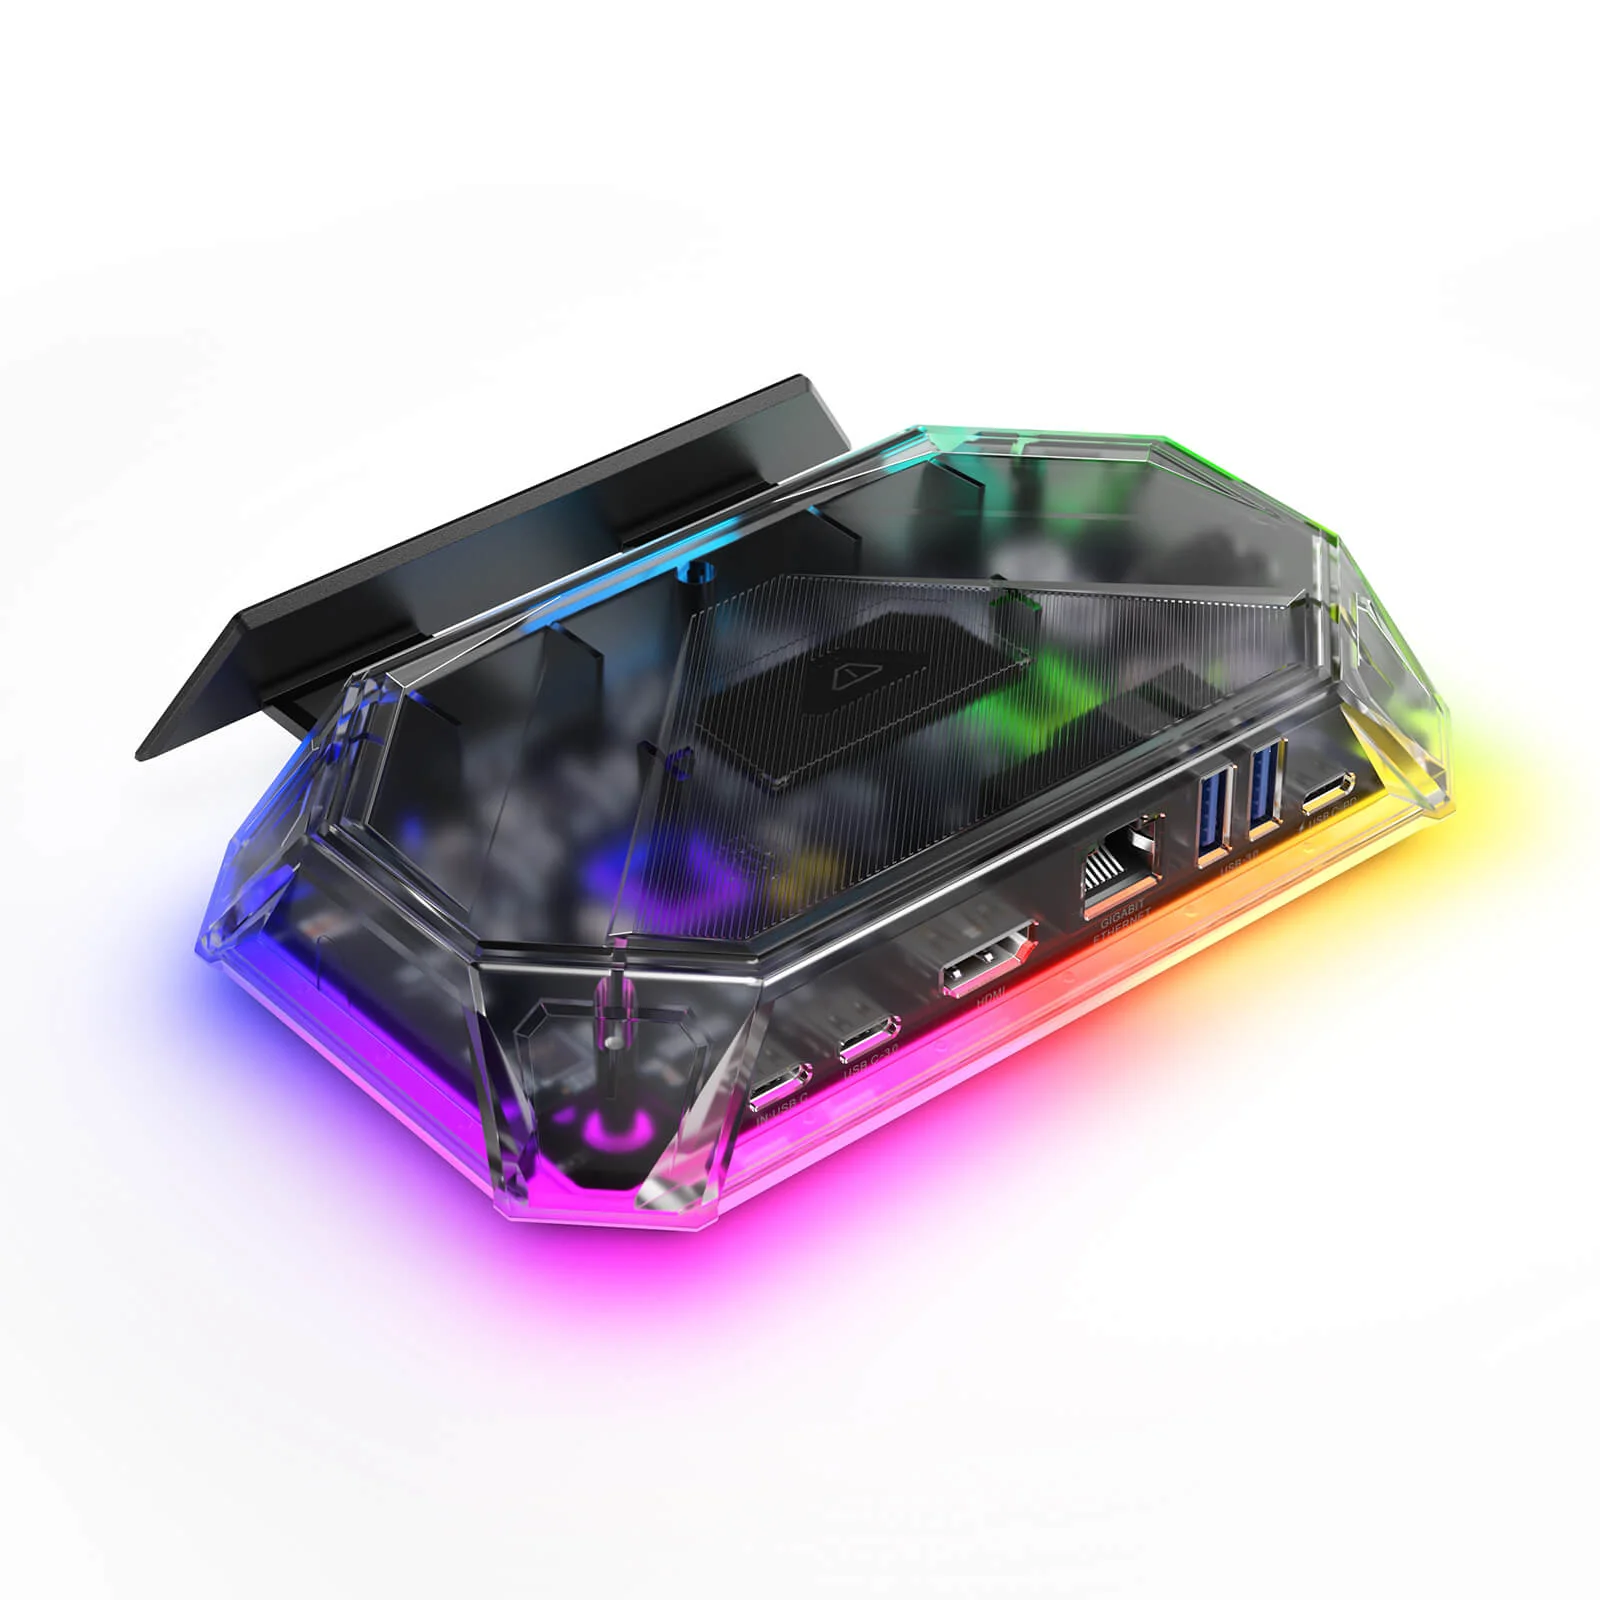 JSAUX reveals new 8-in-1 and 12-in-1 transparent RGB docking